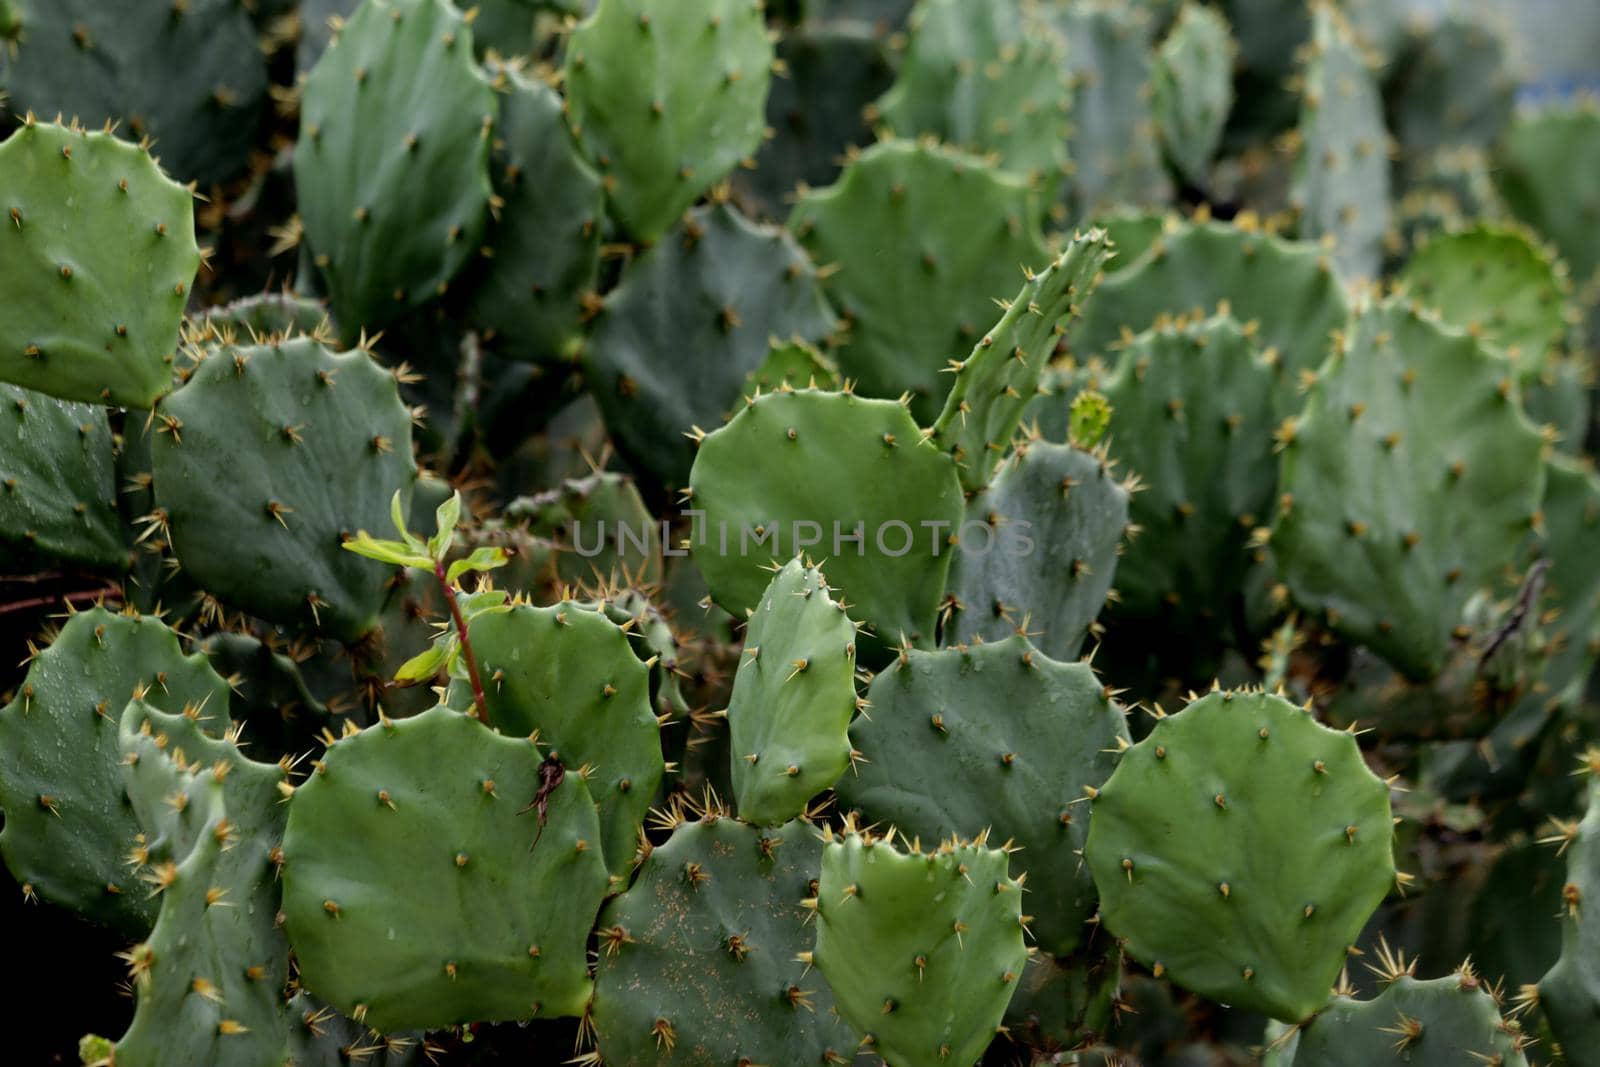 salvador, bahia / brazil - november 29, 2018: Cactus plantation used for decoration of the environment and also as animal feed on dry land.